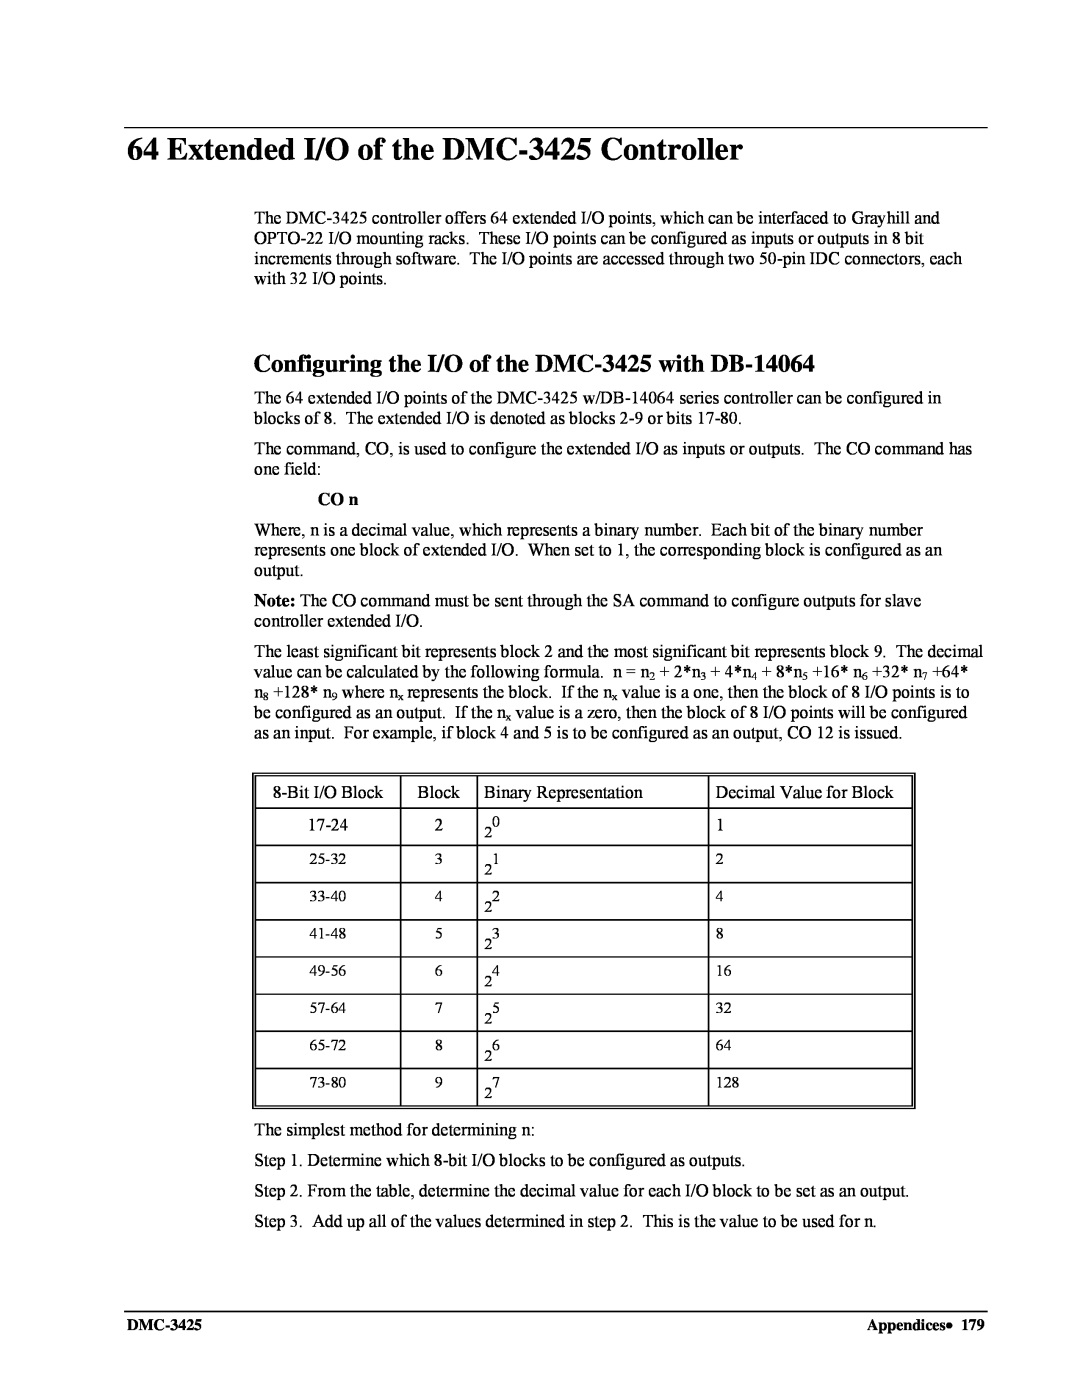 Galil user manual Extended I/O of the DMC-3425Controller, Configuring the I/O of the DMC-3425with DB-14064 